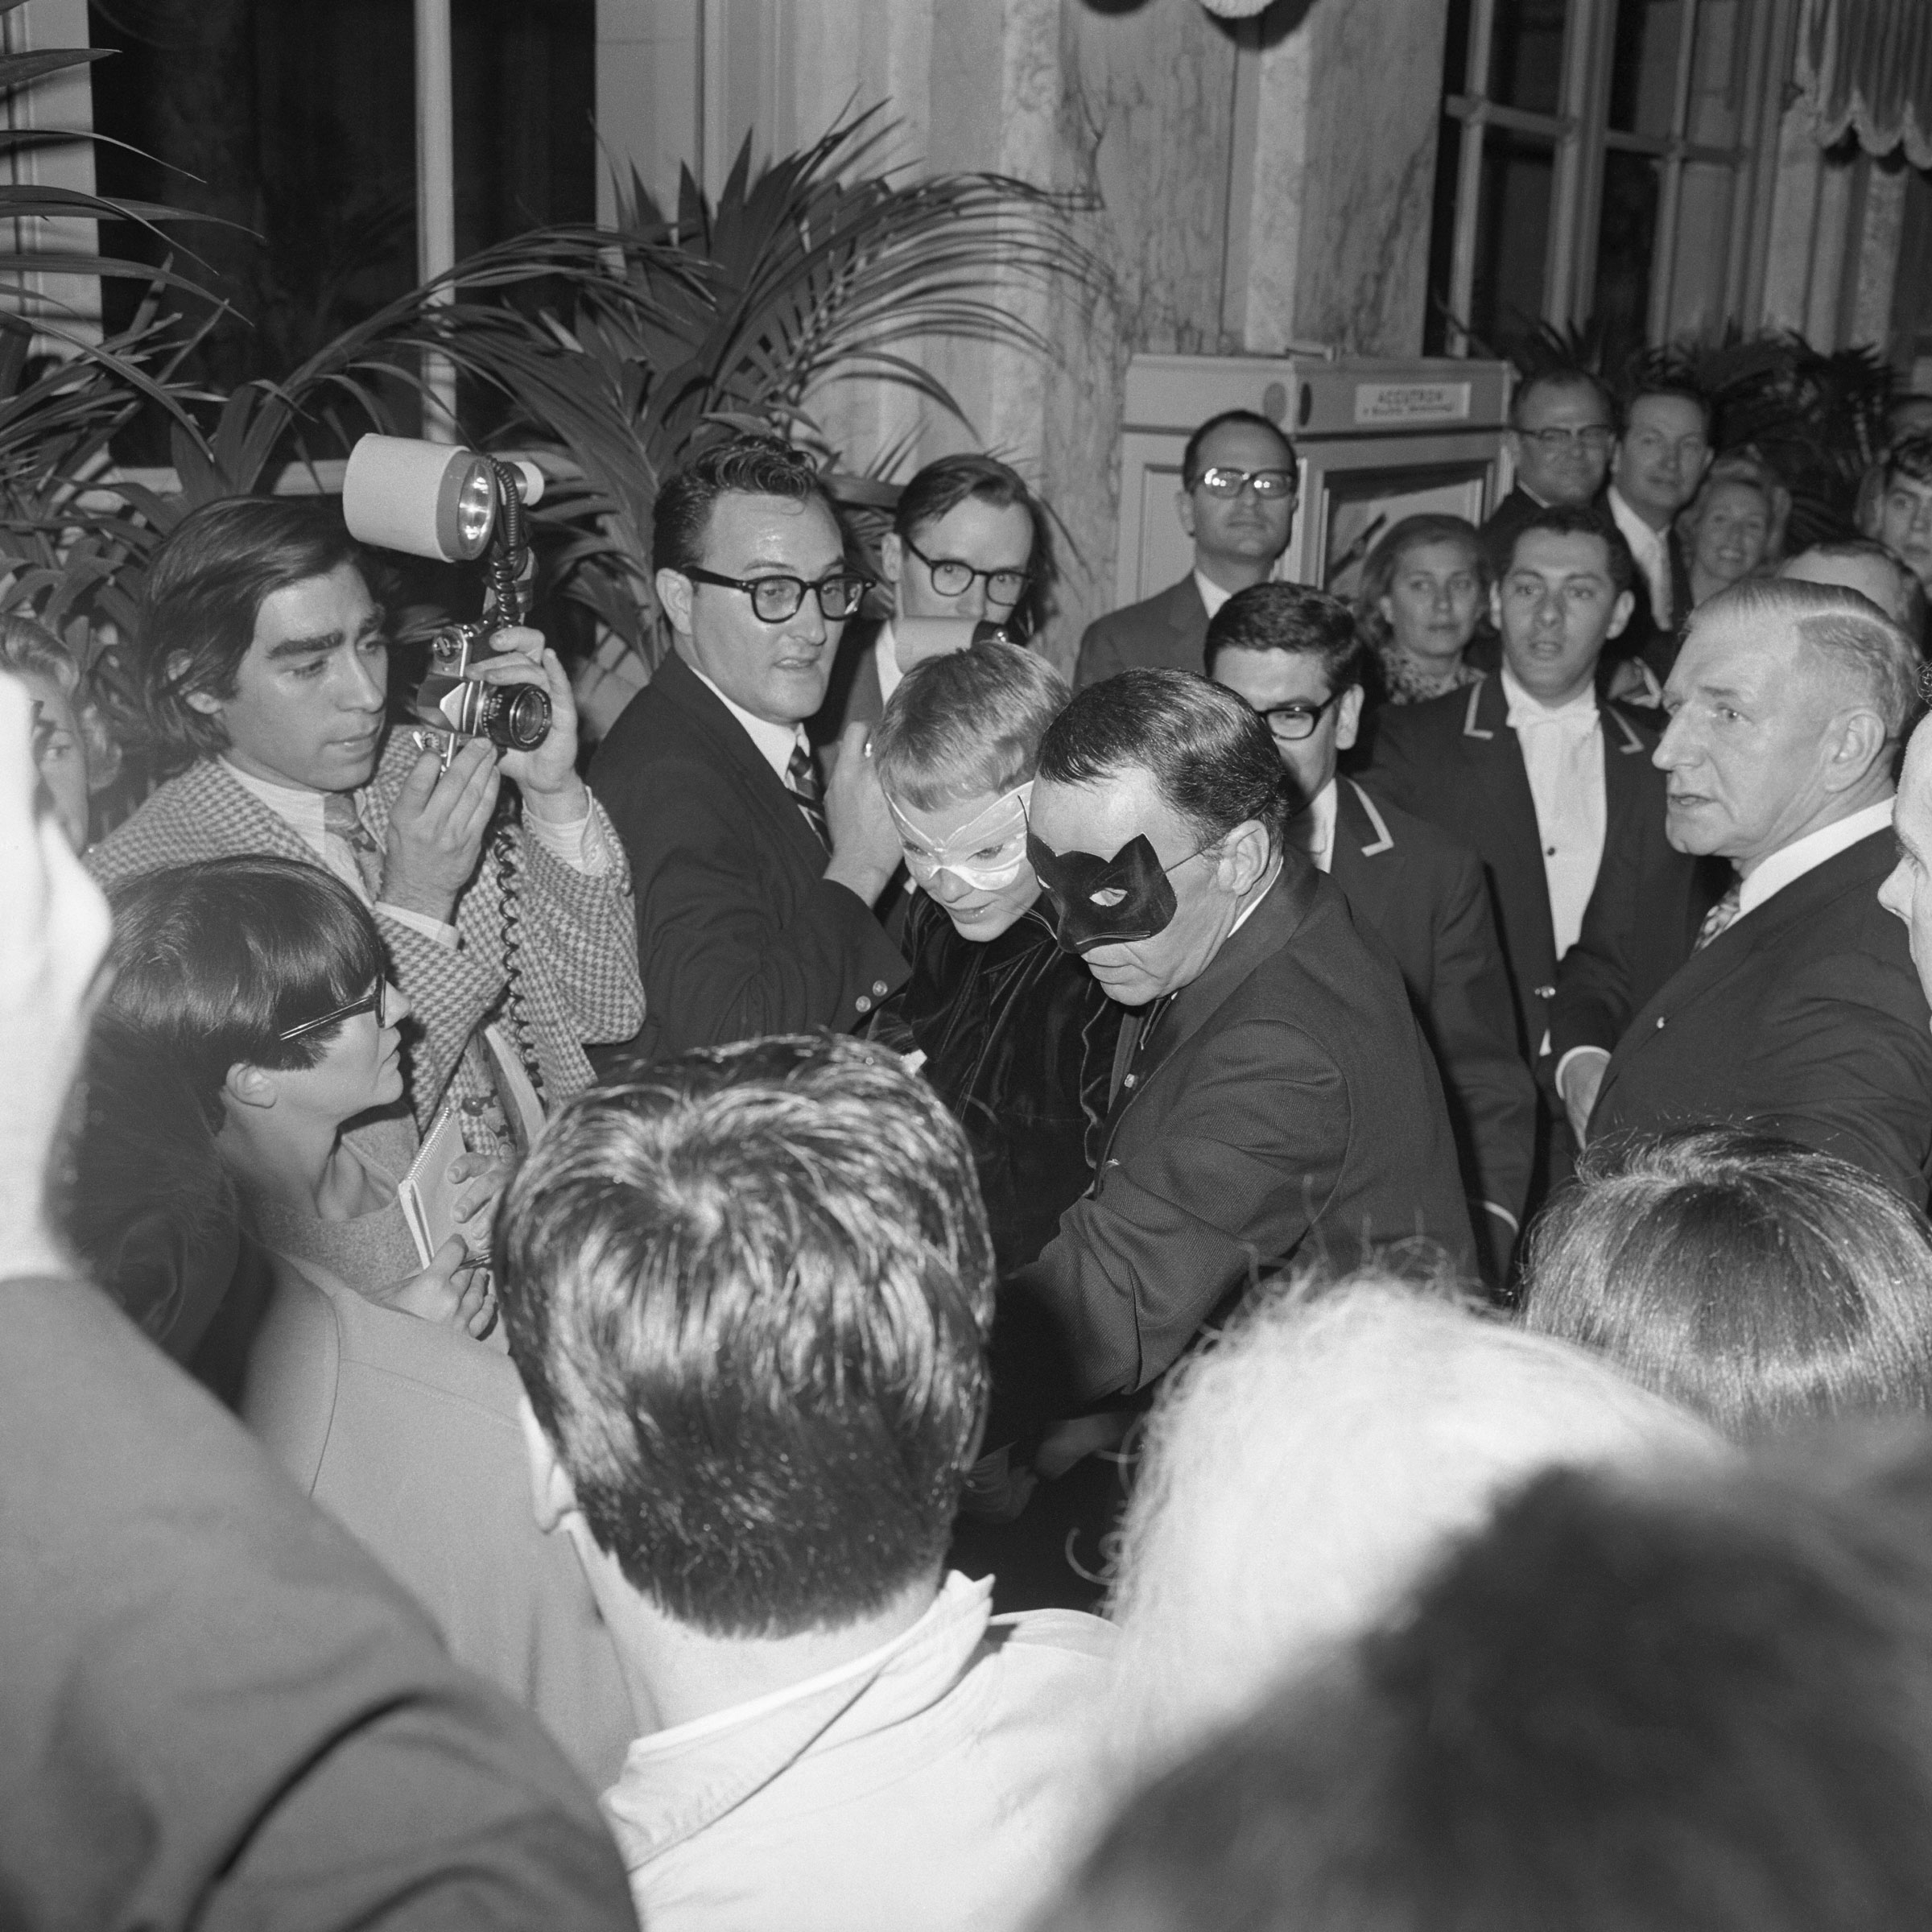 Reporters swarm Frank Sinatra and Mia Farrow as they arrive at Truman Capote’s Black and White Ball.